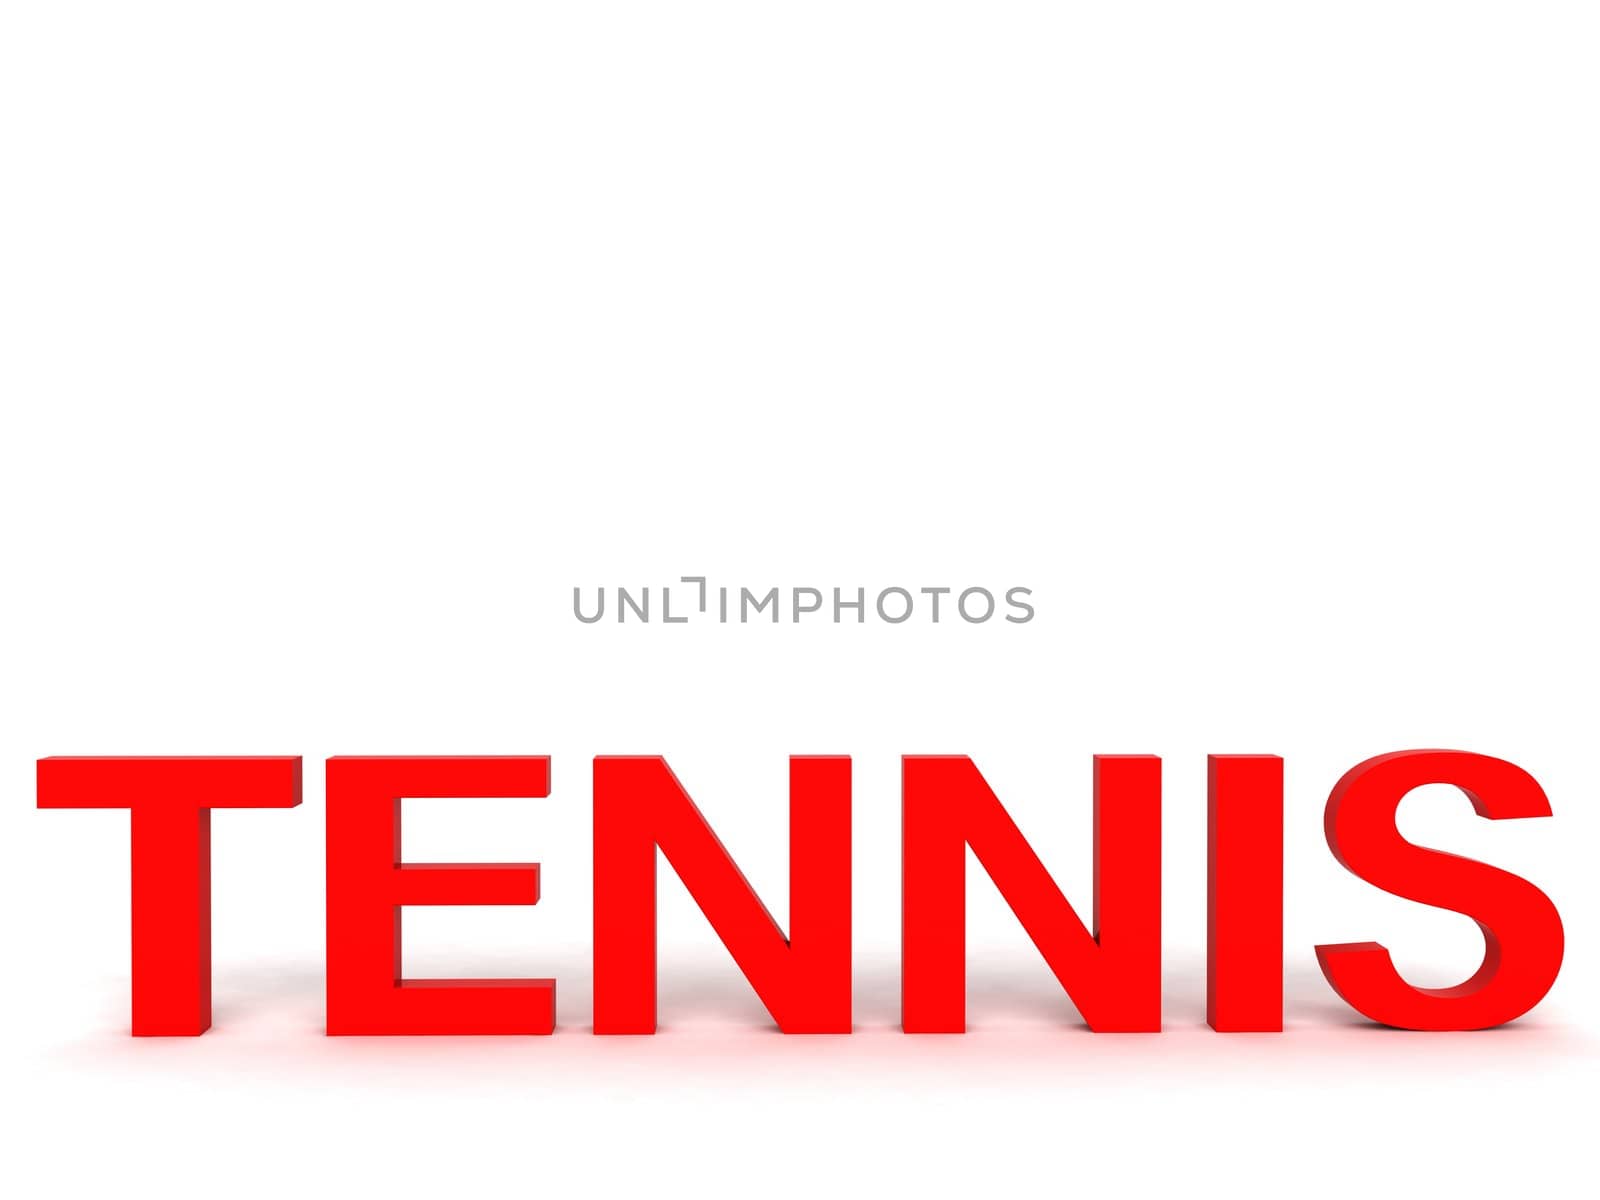 front view of three dimensional tennis text



